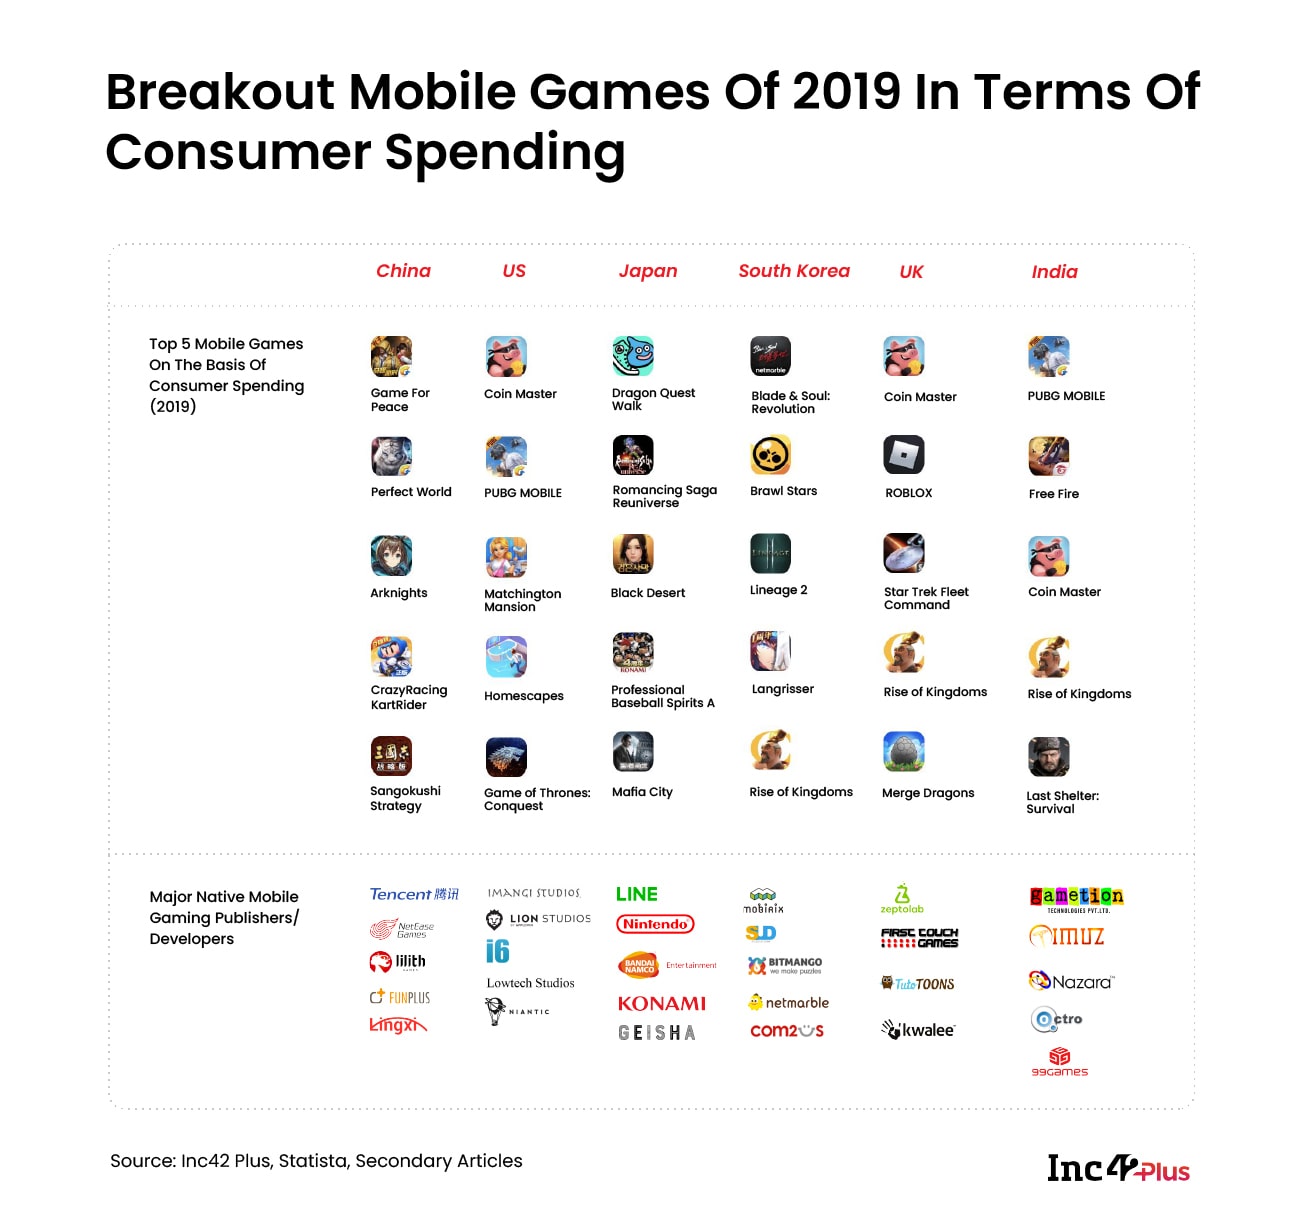 Breakout mobile games of 2019 In terms of consumer spending